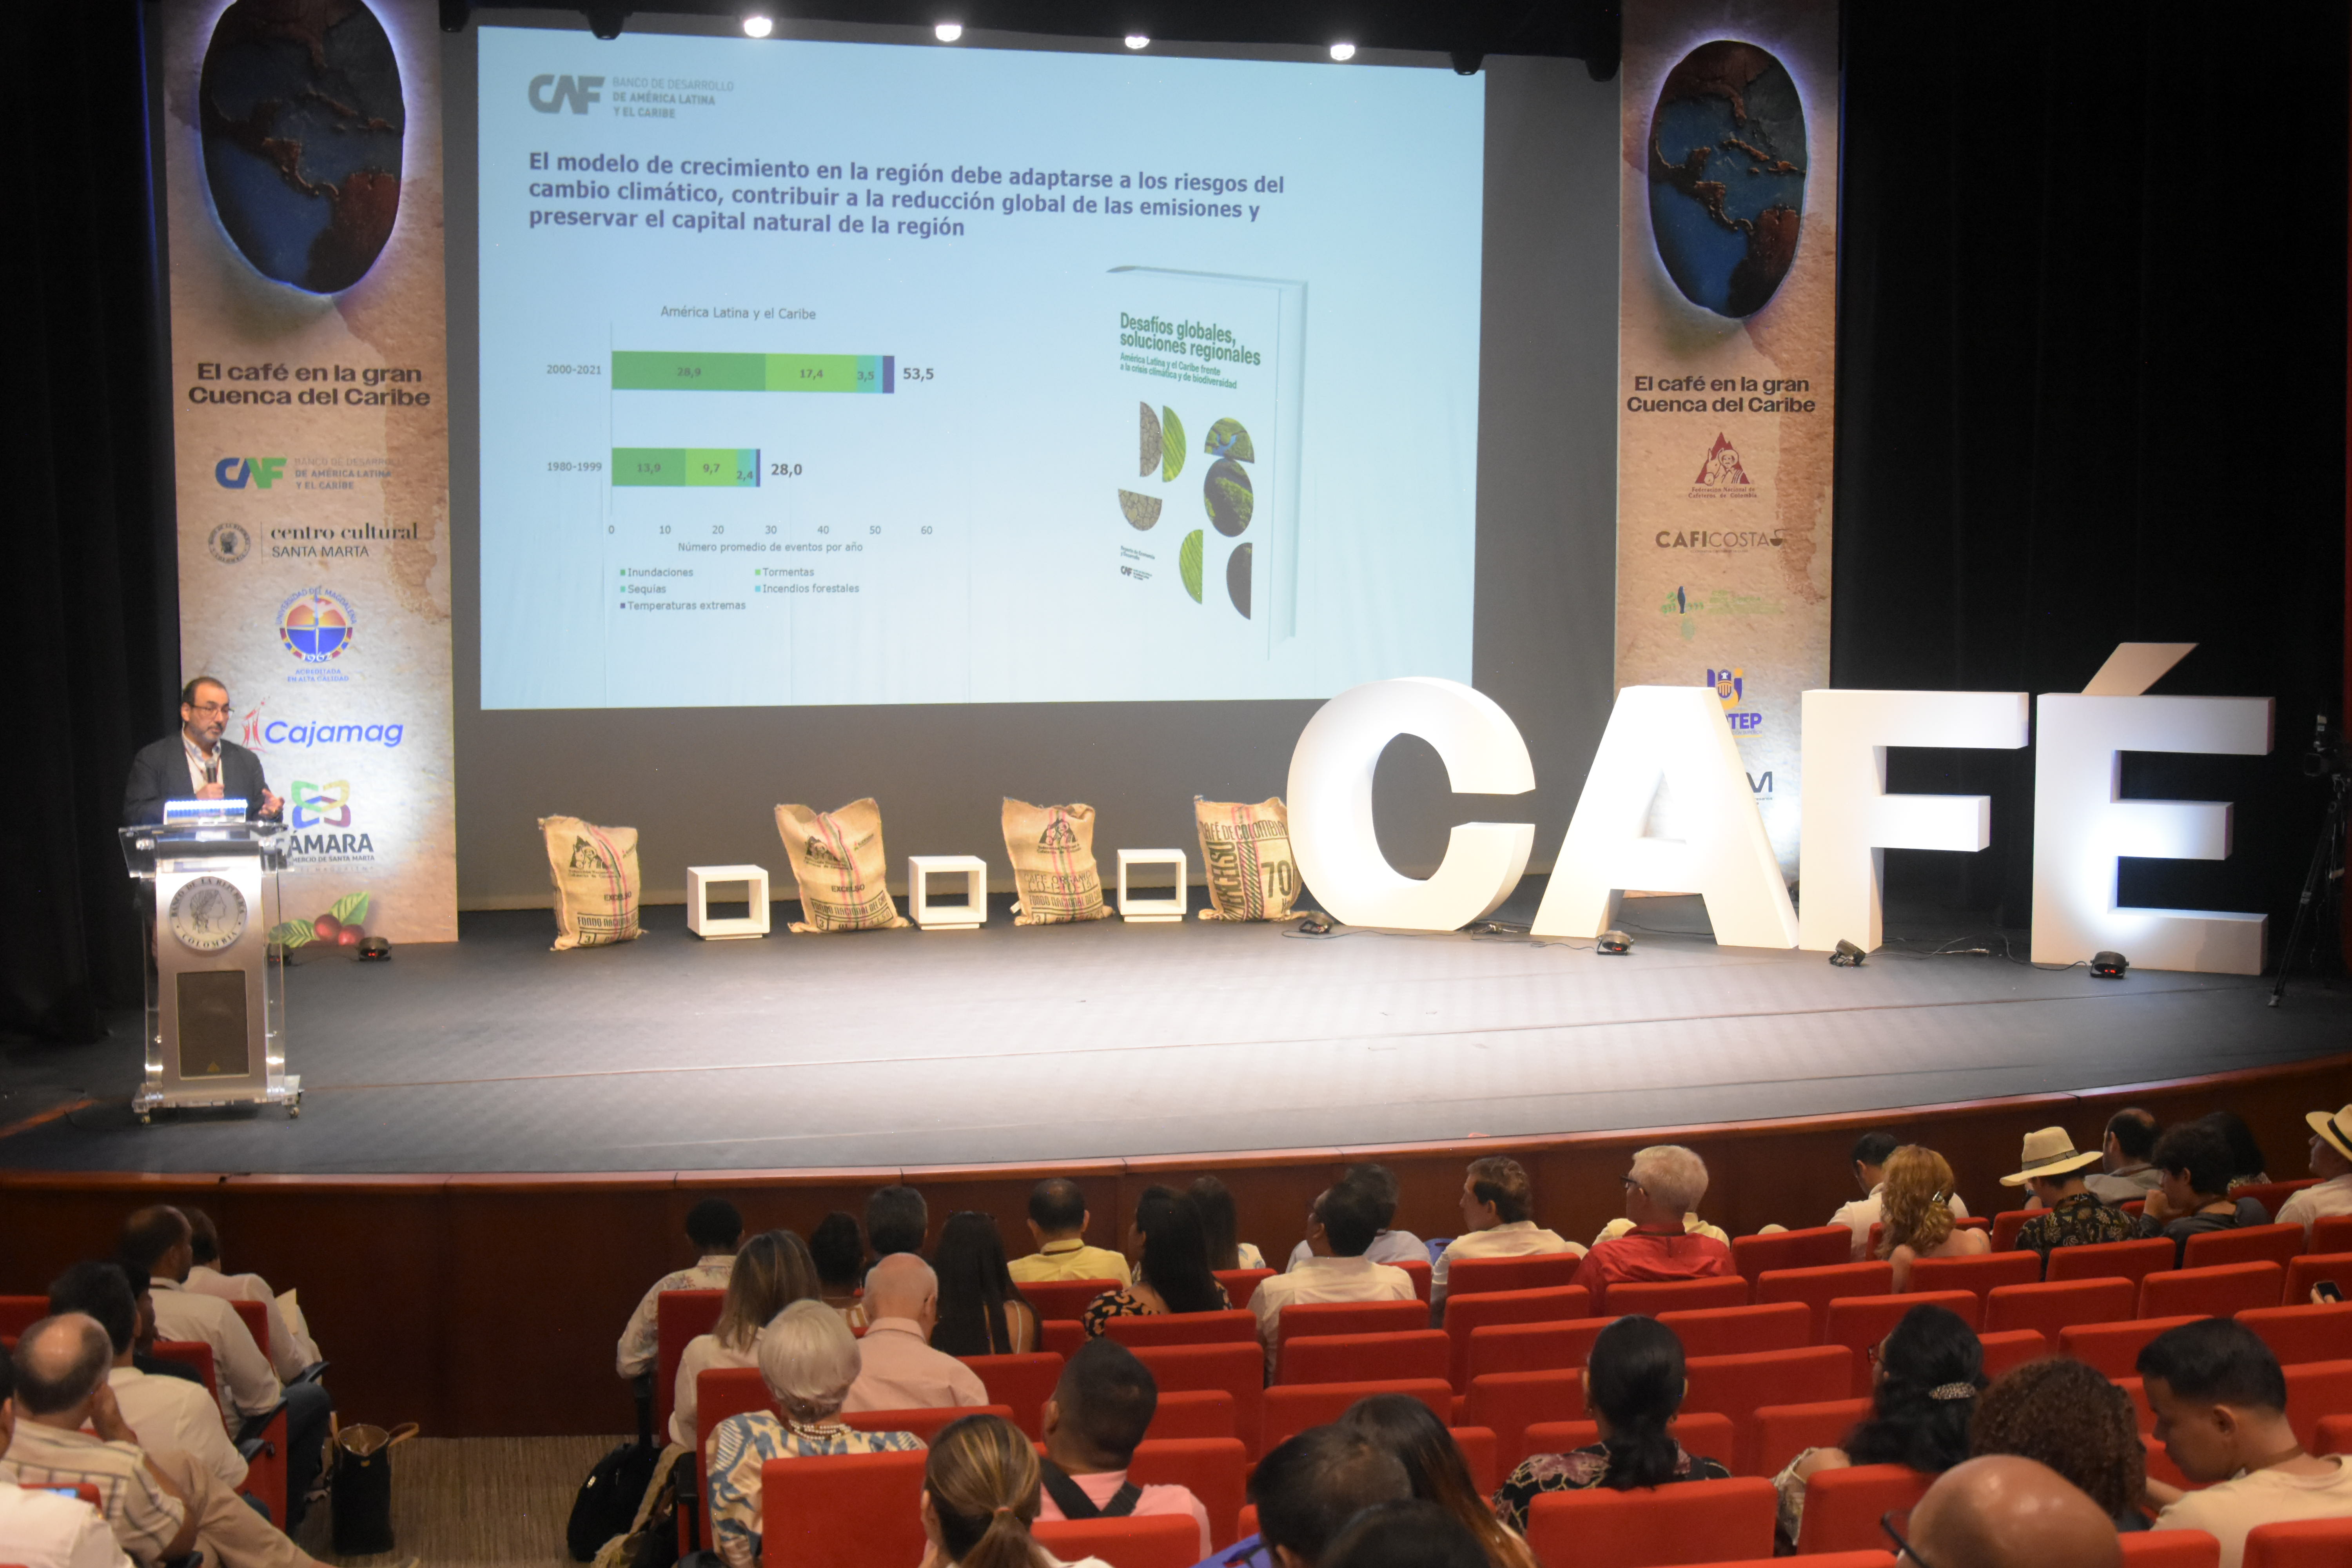 Colombia intends to lead coffee sustainability